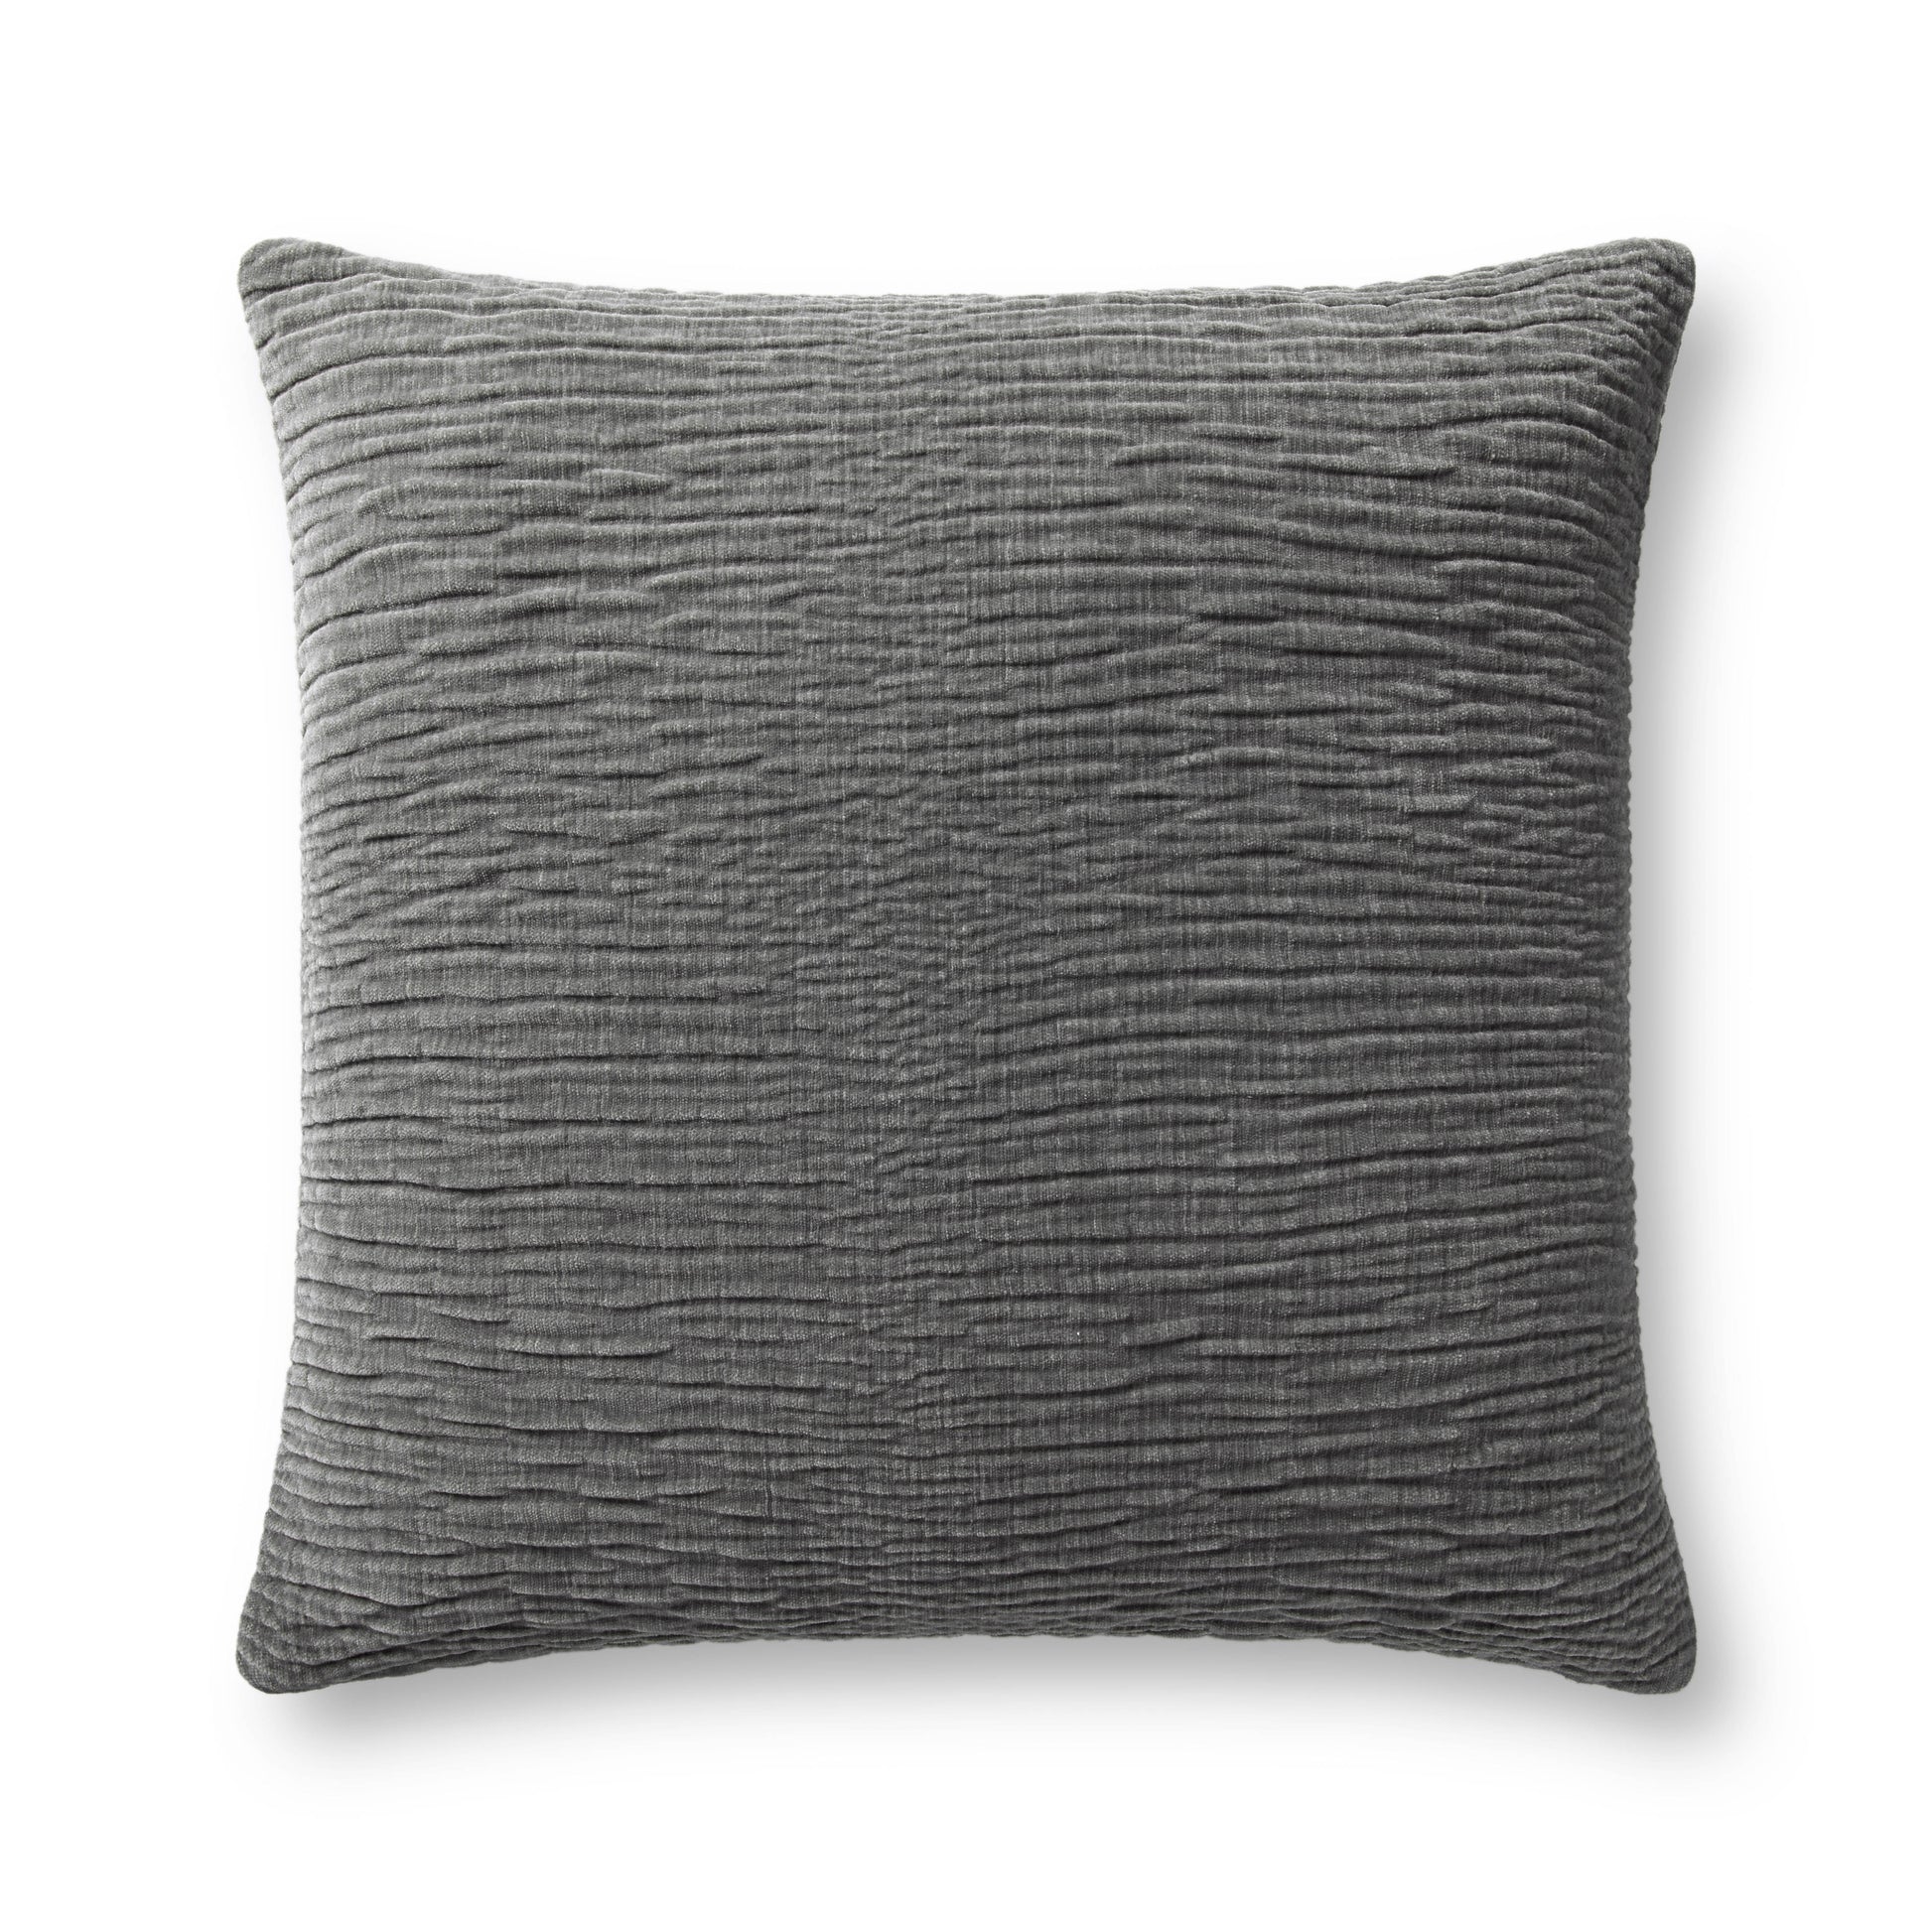 Photo of a pillow;  Grey 22'' x 22'' Cover w/Poly Pillow